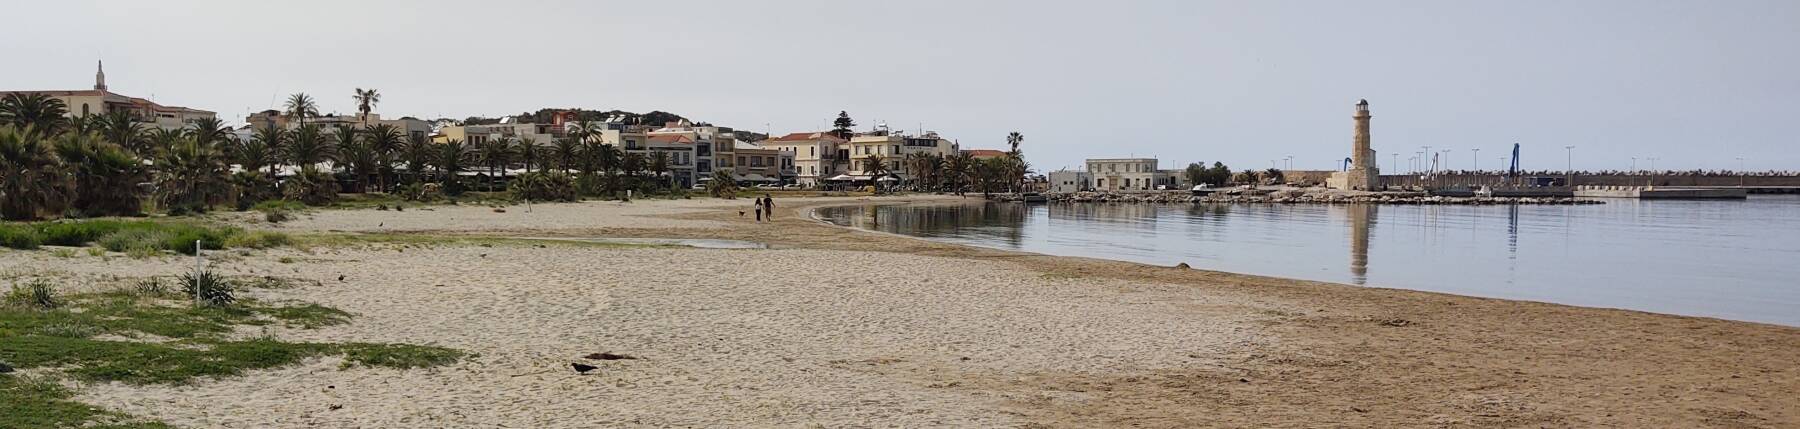 The waterfront in Rethymno in western Crete.